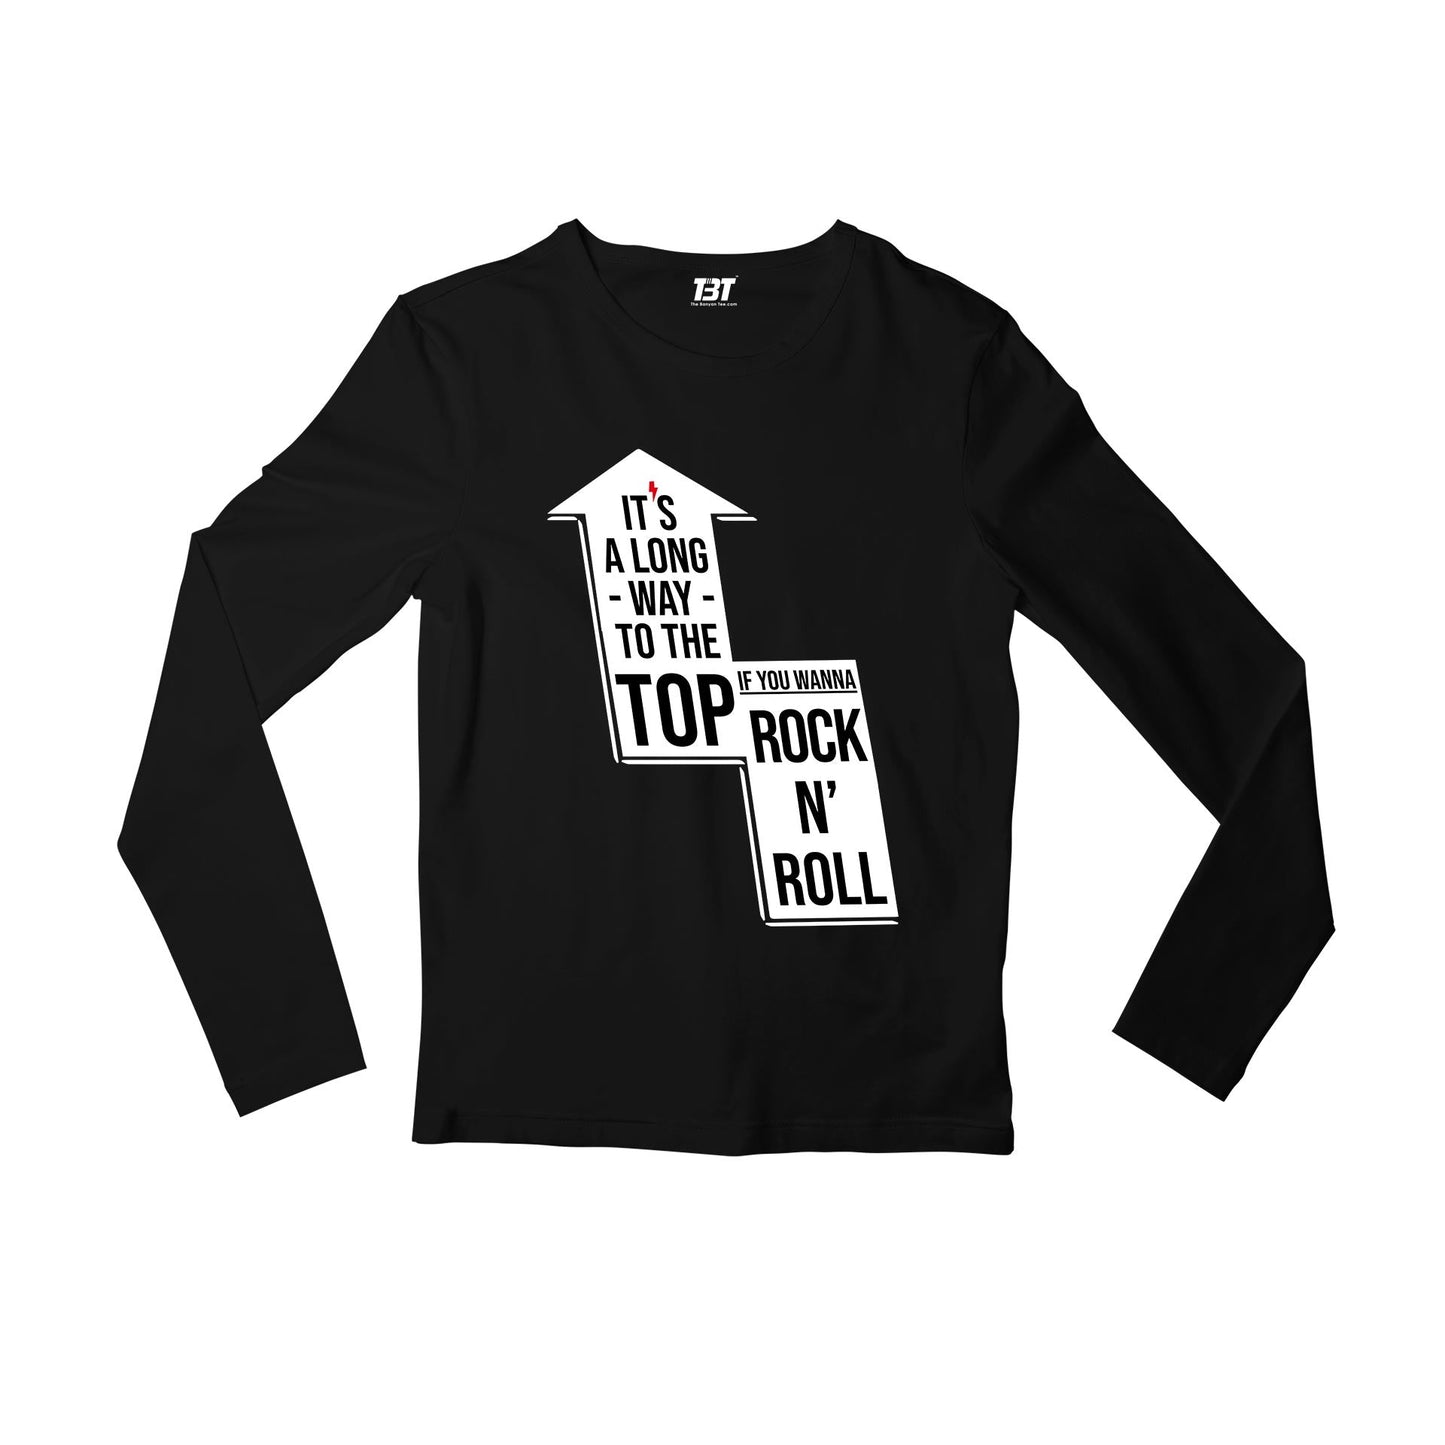 ac/dc long way to the top full sleeves long sleeves music band buy online india the banyan tee tbt men women girls boys unisex black